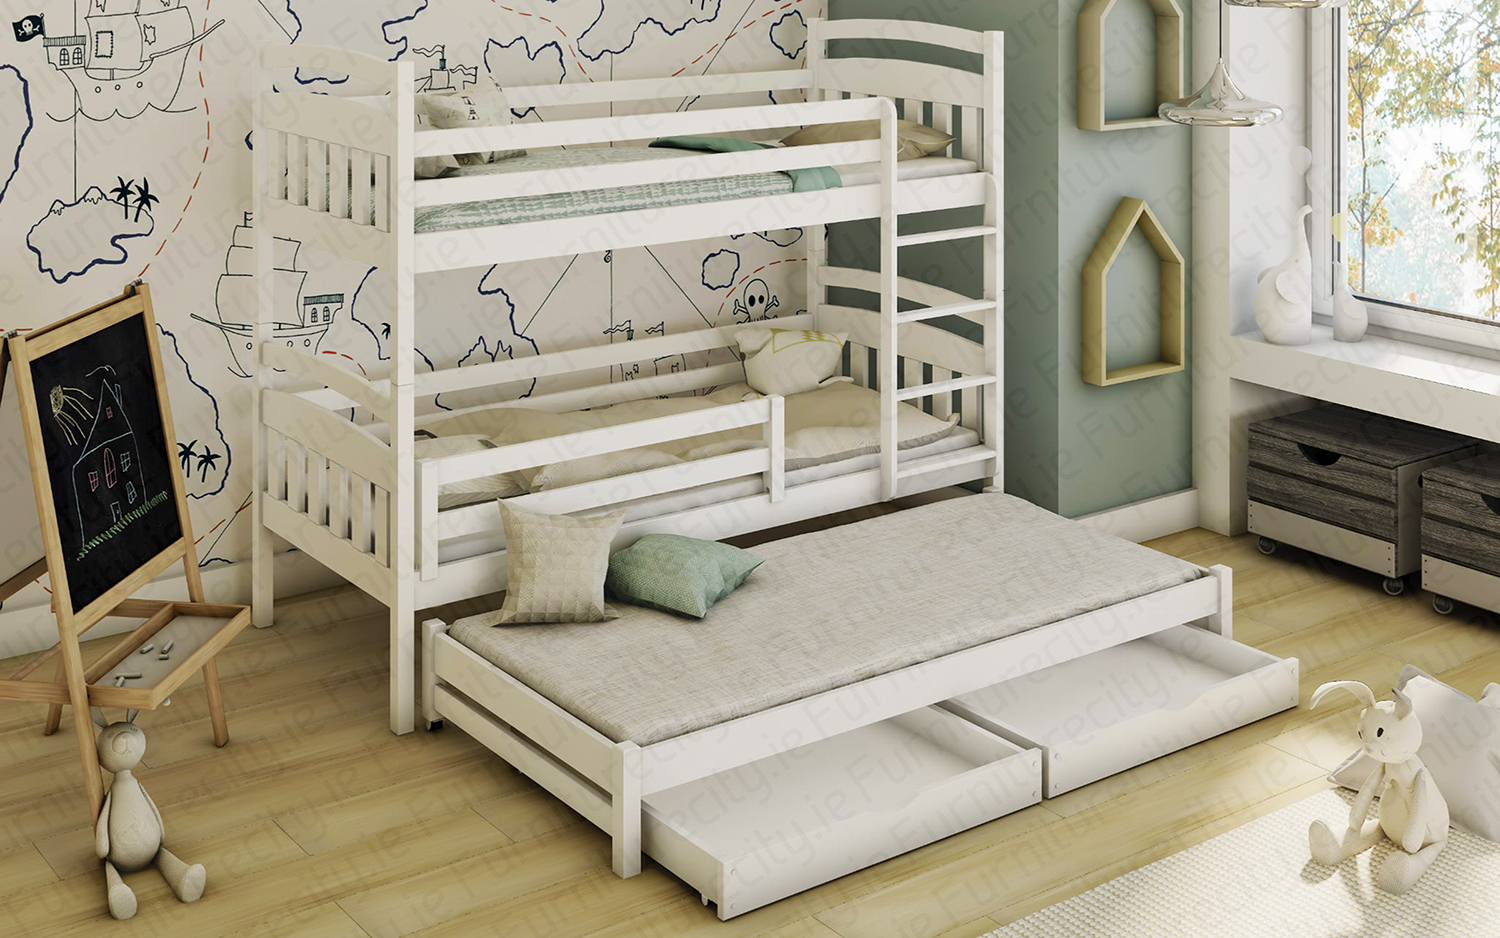 Bunk Bed Specialists Top Quality And, Bunk Beds With Pull Out Bed Underneath